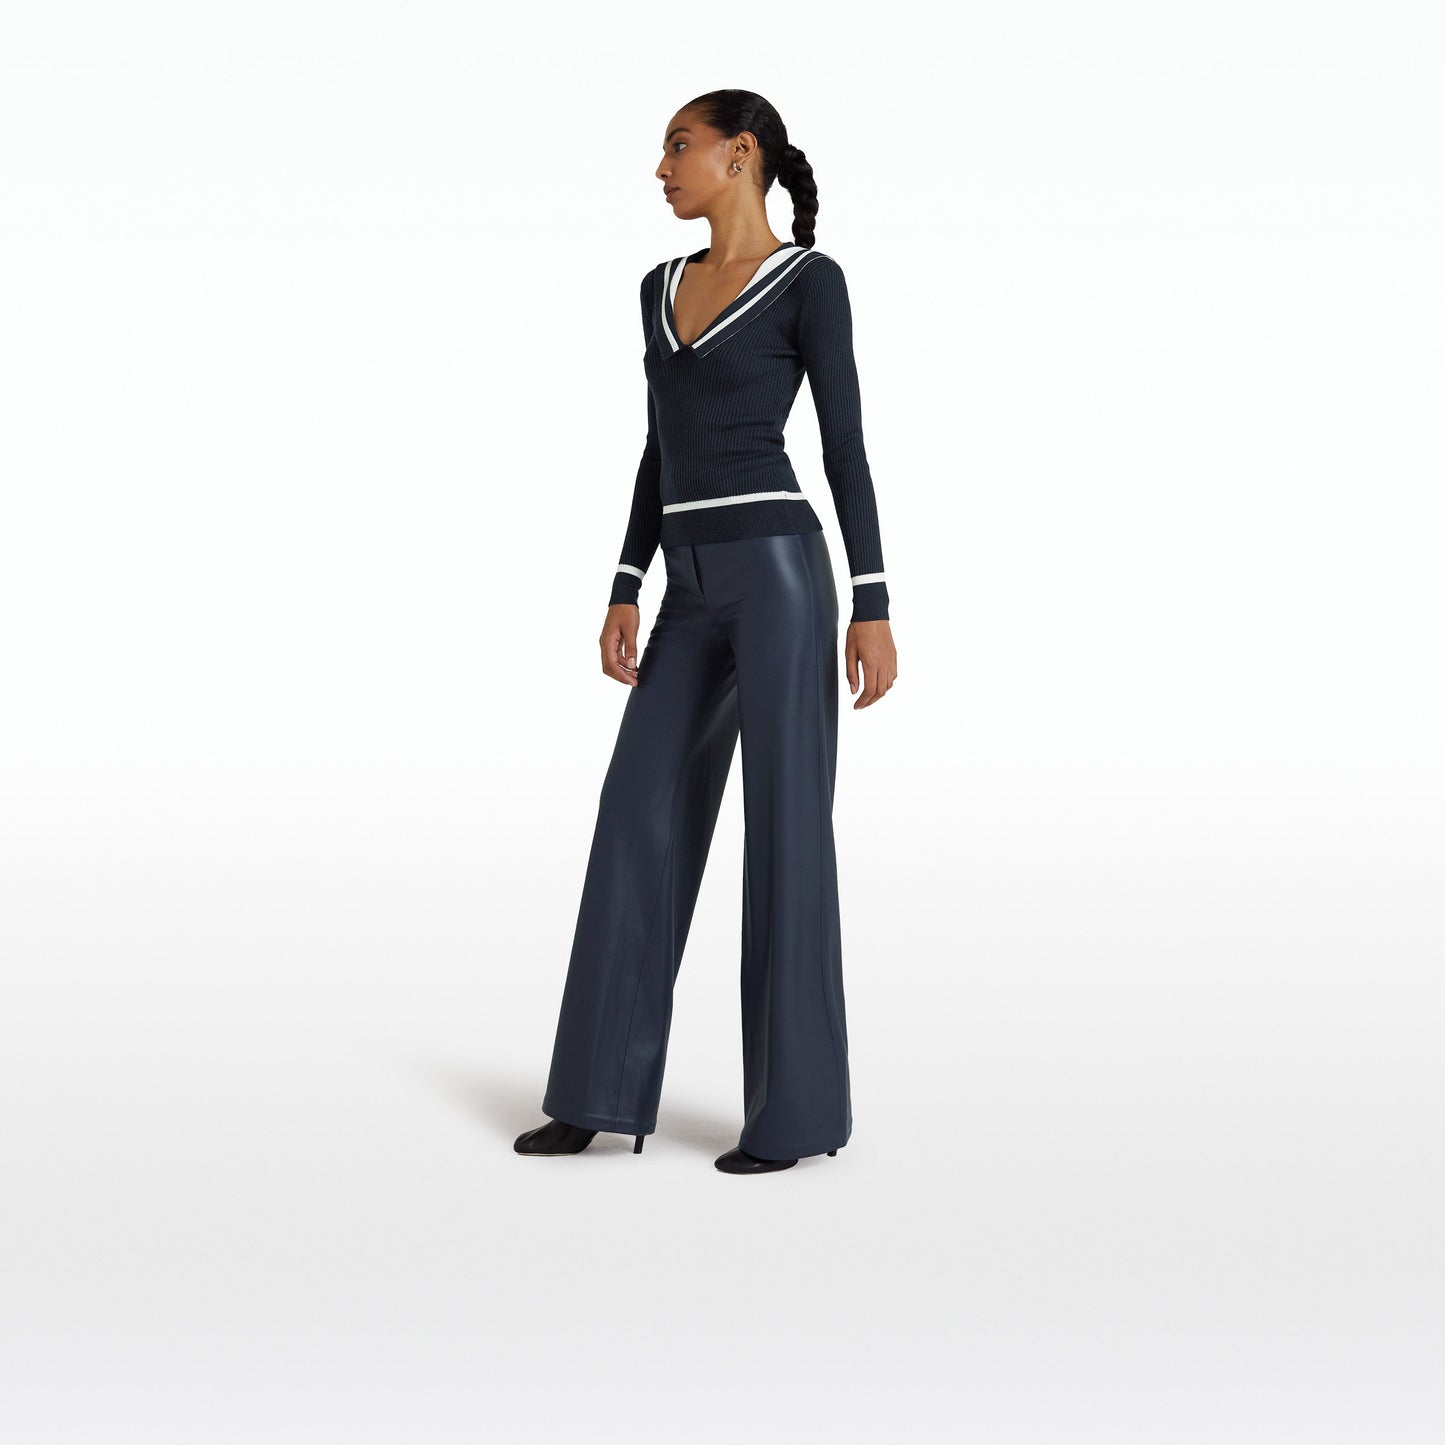 Narqis Navy Vegan Leather Trousers